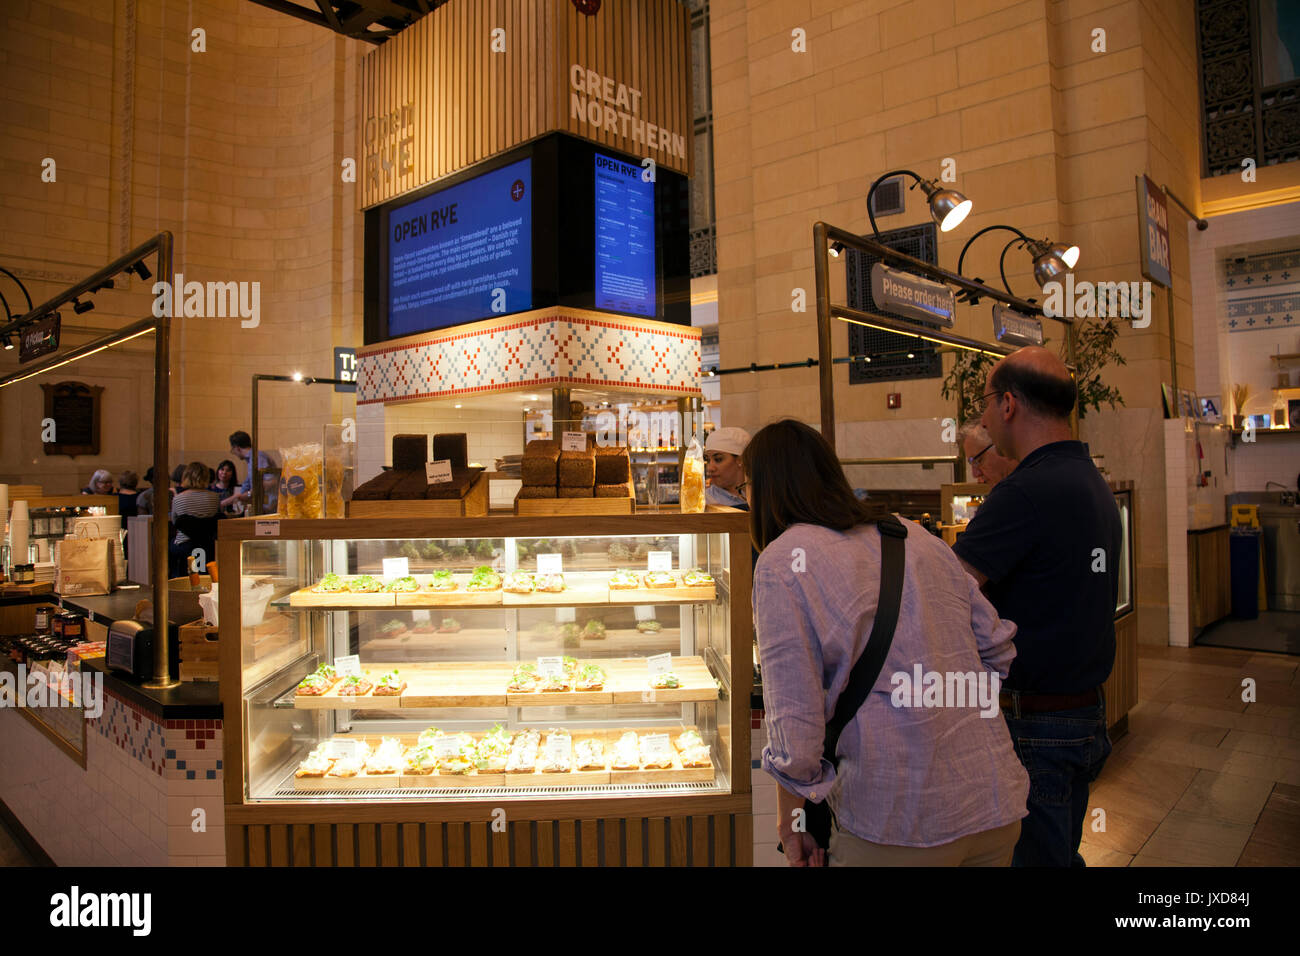 Great Northern Food Hall in Grand Central Station in New York City - USA Stockfoto